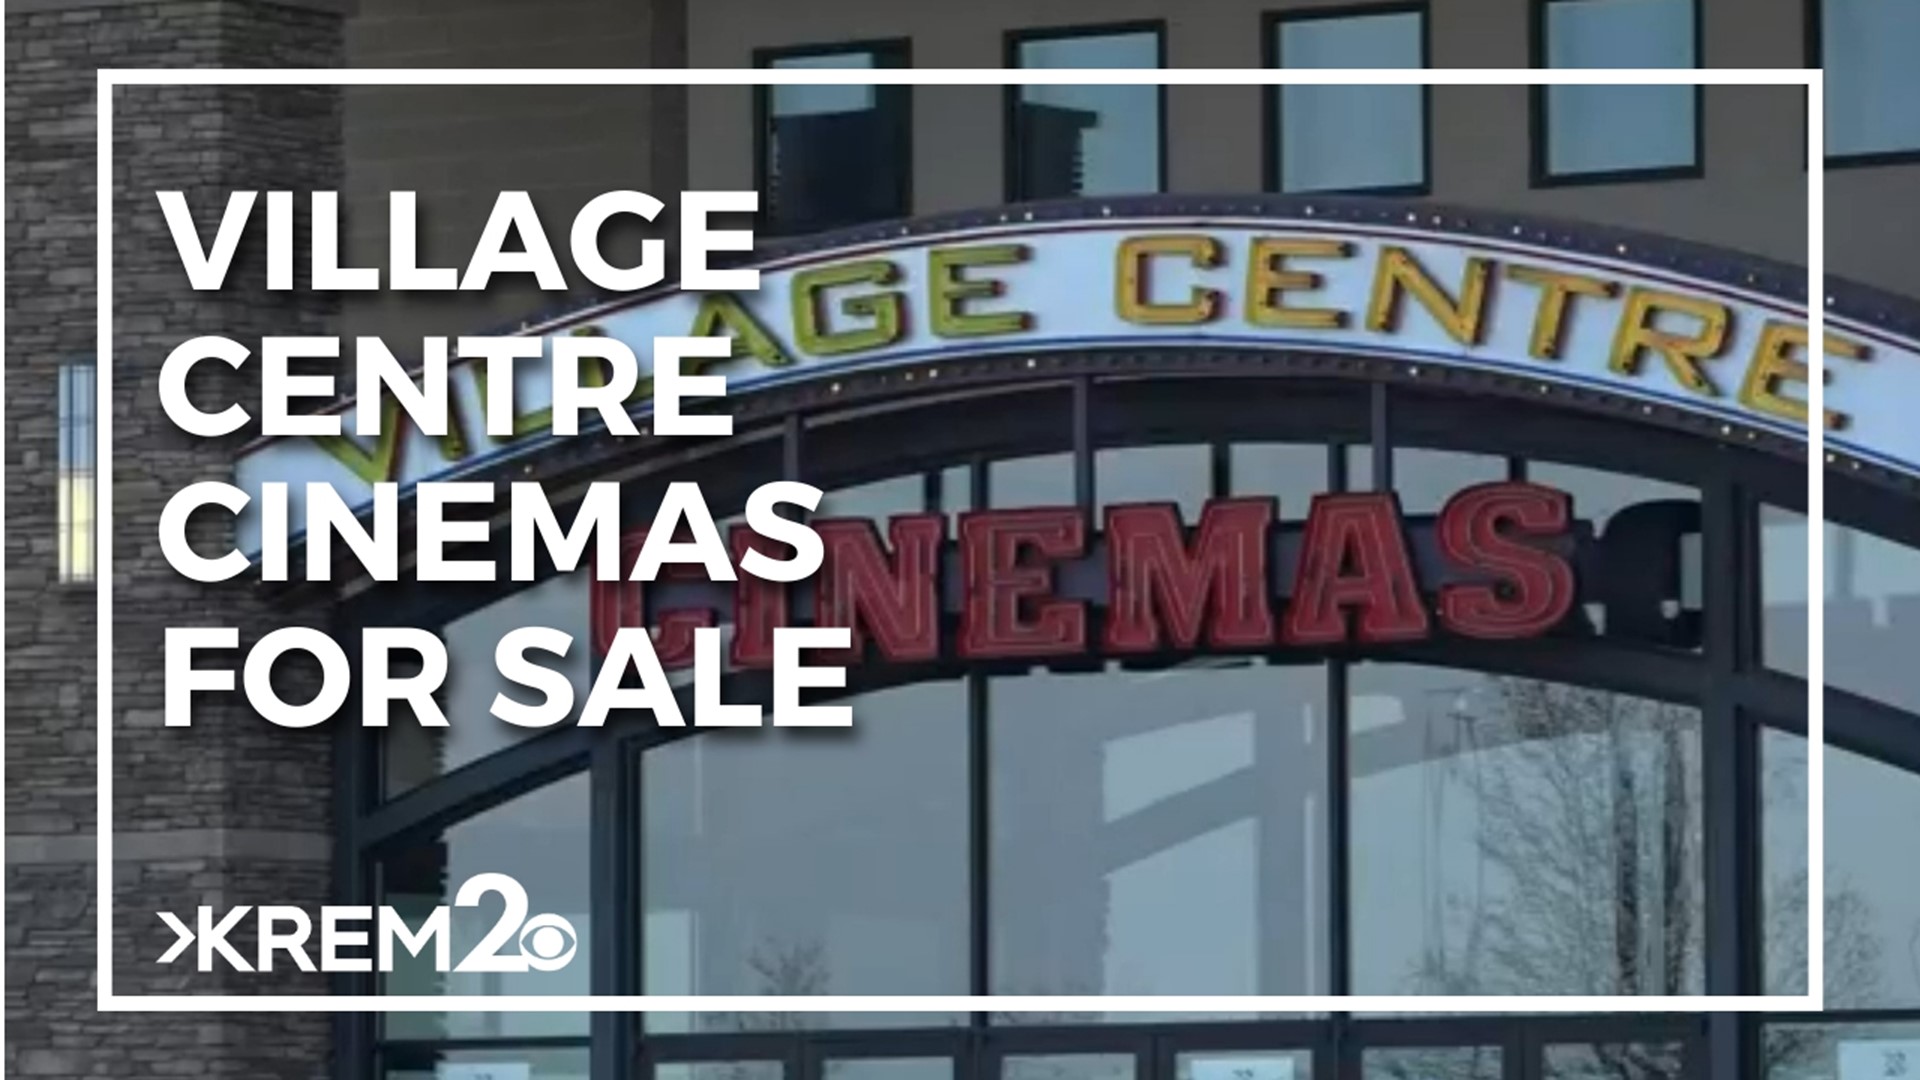 Real estate agents hope a prospective buyer will make an offer on the theater by the end of the week.